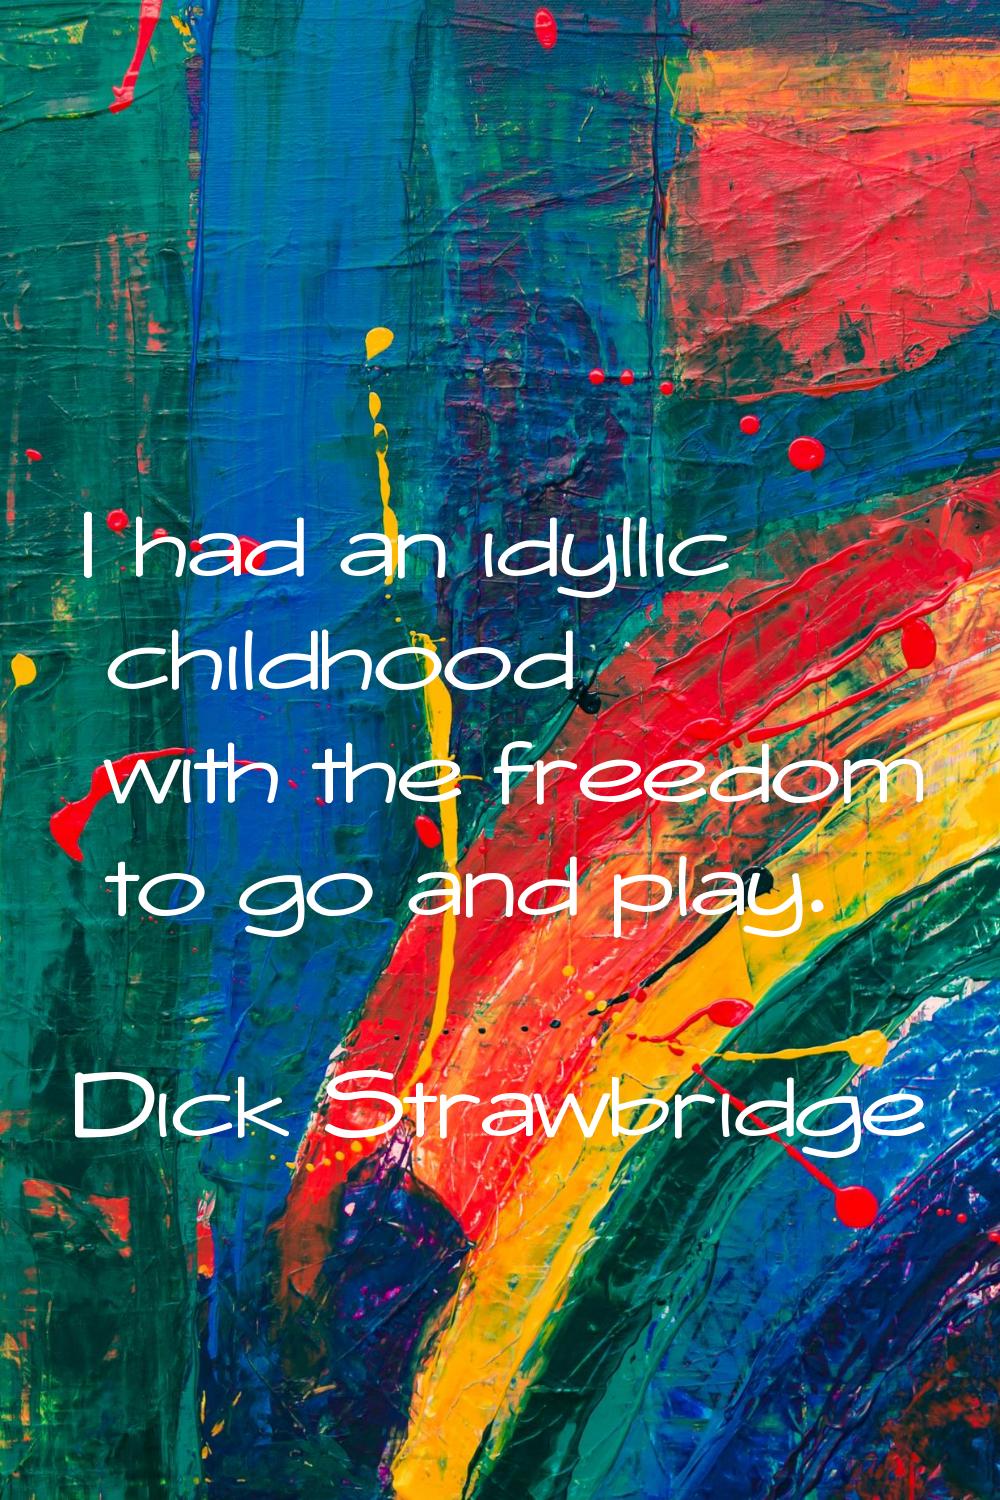 I had an idyllic childhood with the freedom to go and play.